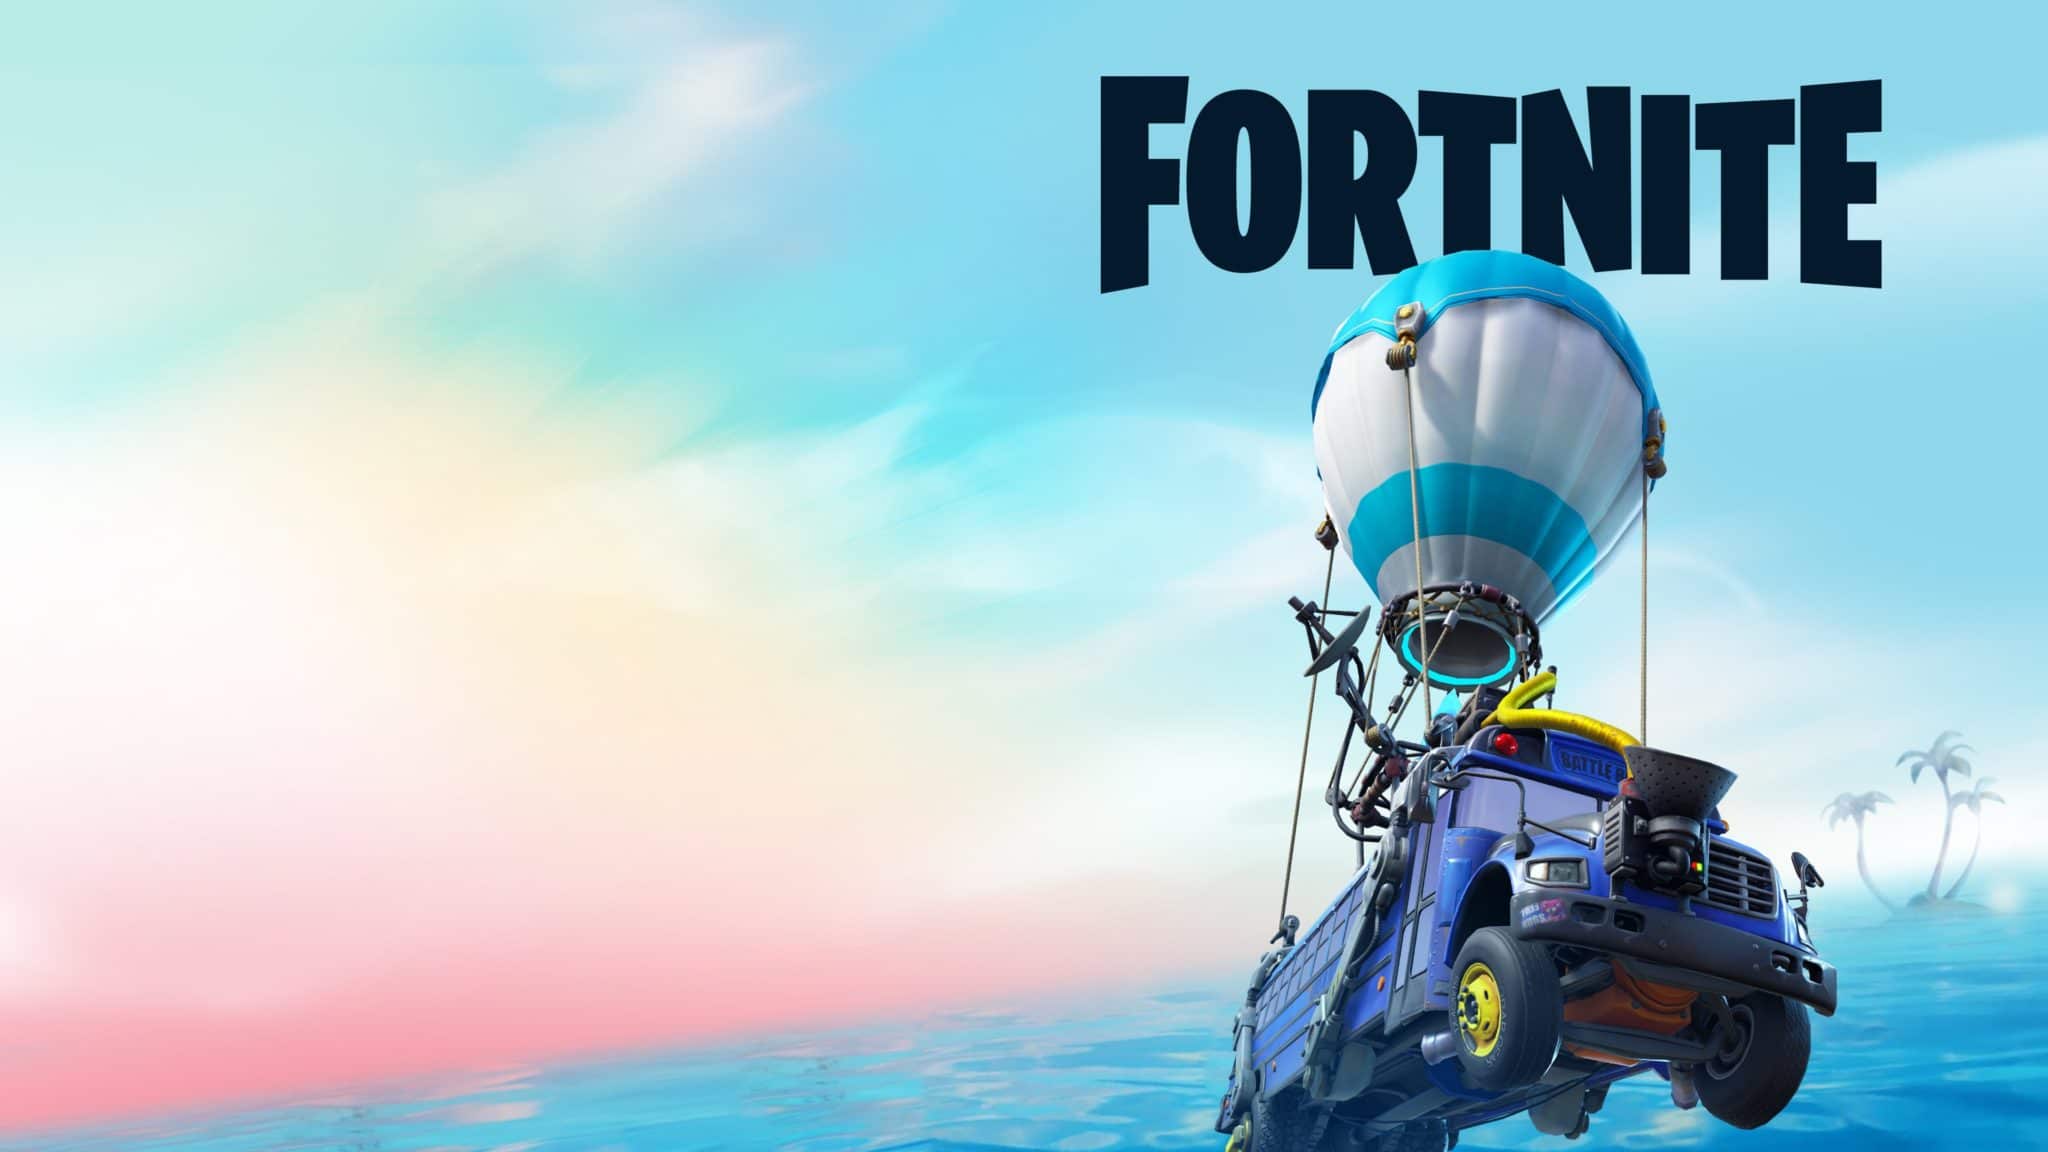 Rushed PS Store Update All But Confirms Fortnite Is Going Nautical For Chapter 2 Season 3